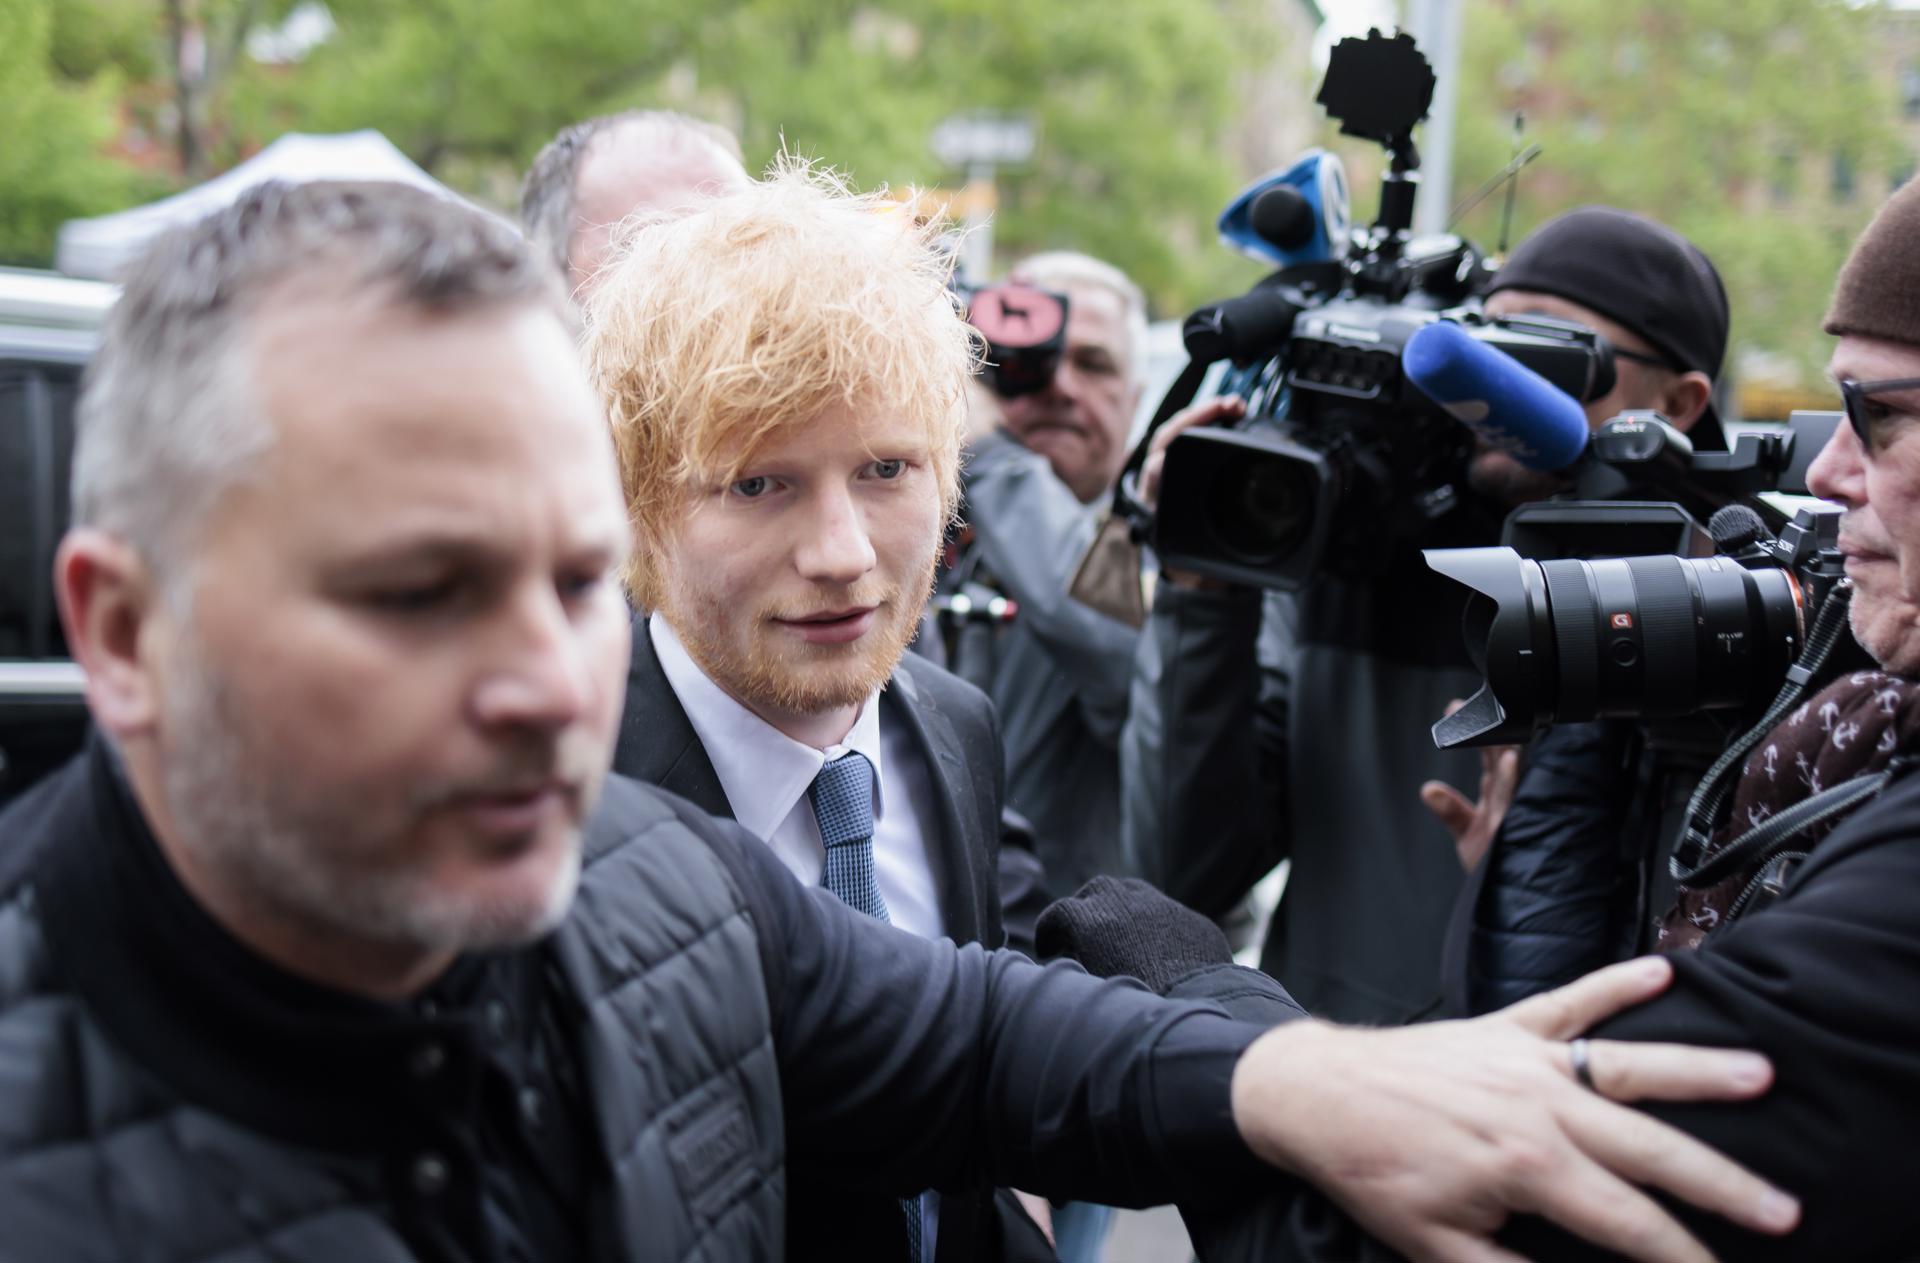 English singer-songwriter Ed Sheeran arrives on 4 May 2023 at a Manhattan courthouse to hear the verdict in a case in which he was accused of plagiarizing a 1973 song co-written by the late R&B and soul legend Marvin Gaye. Sheeran was cleared by the jury of the allegations of copyright infringement. EFE/EPA/JUSTIN LANE